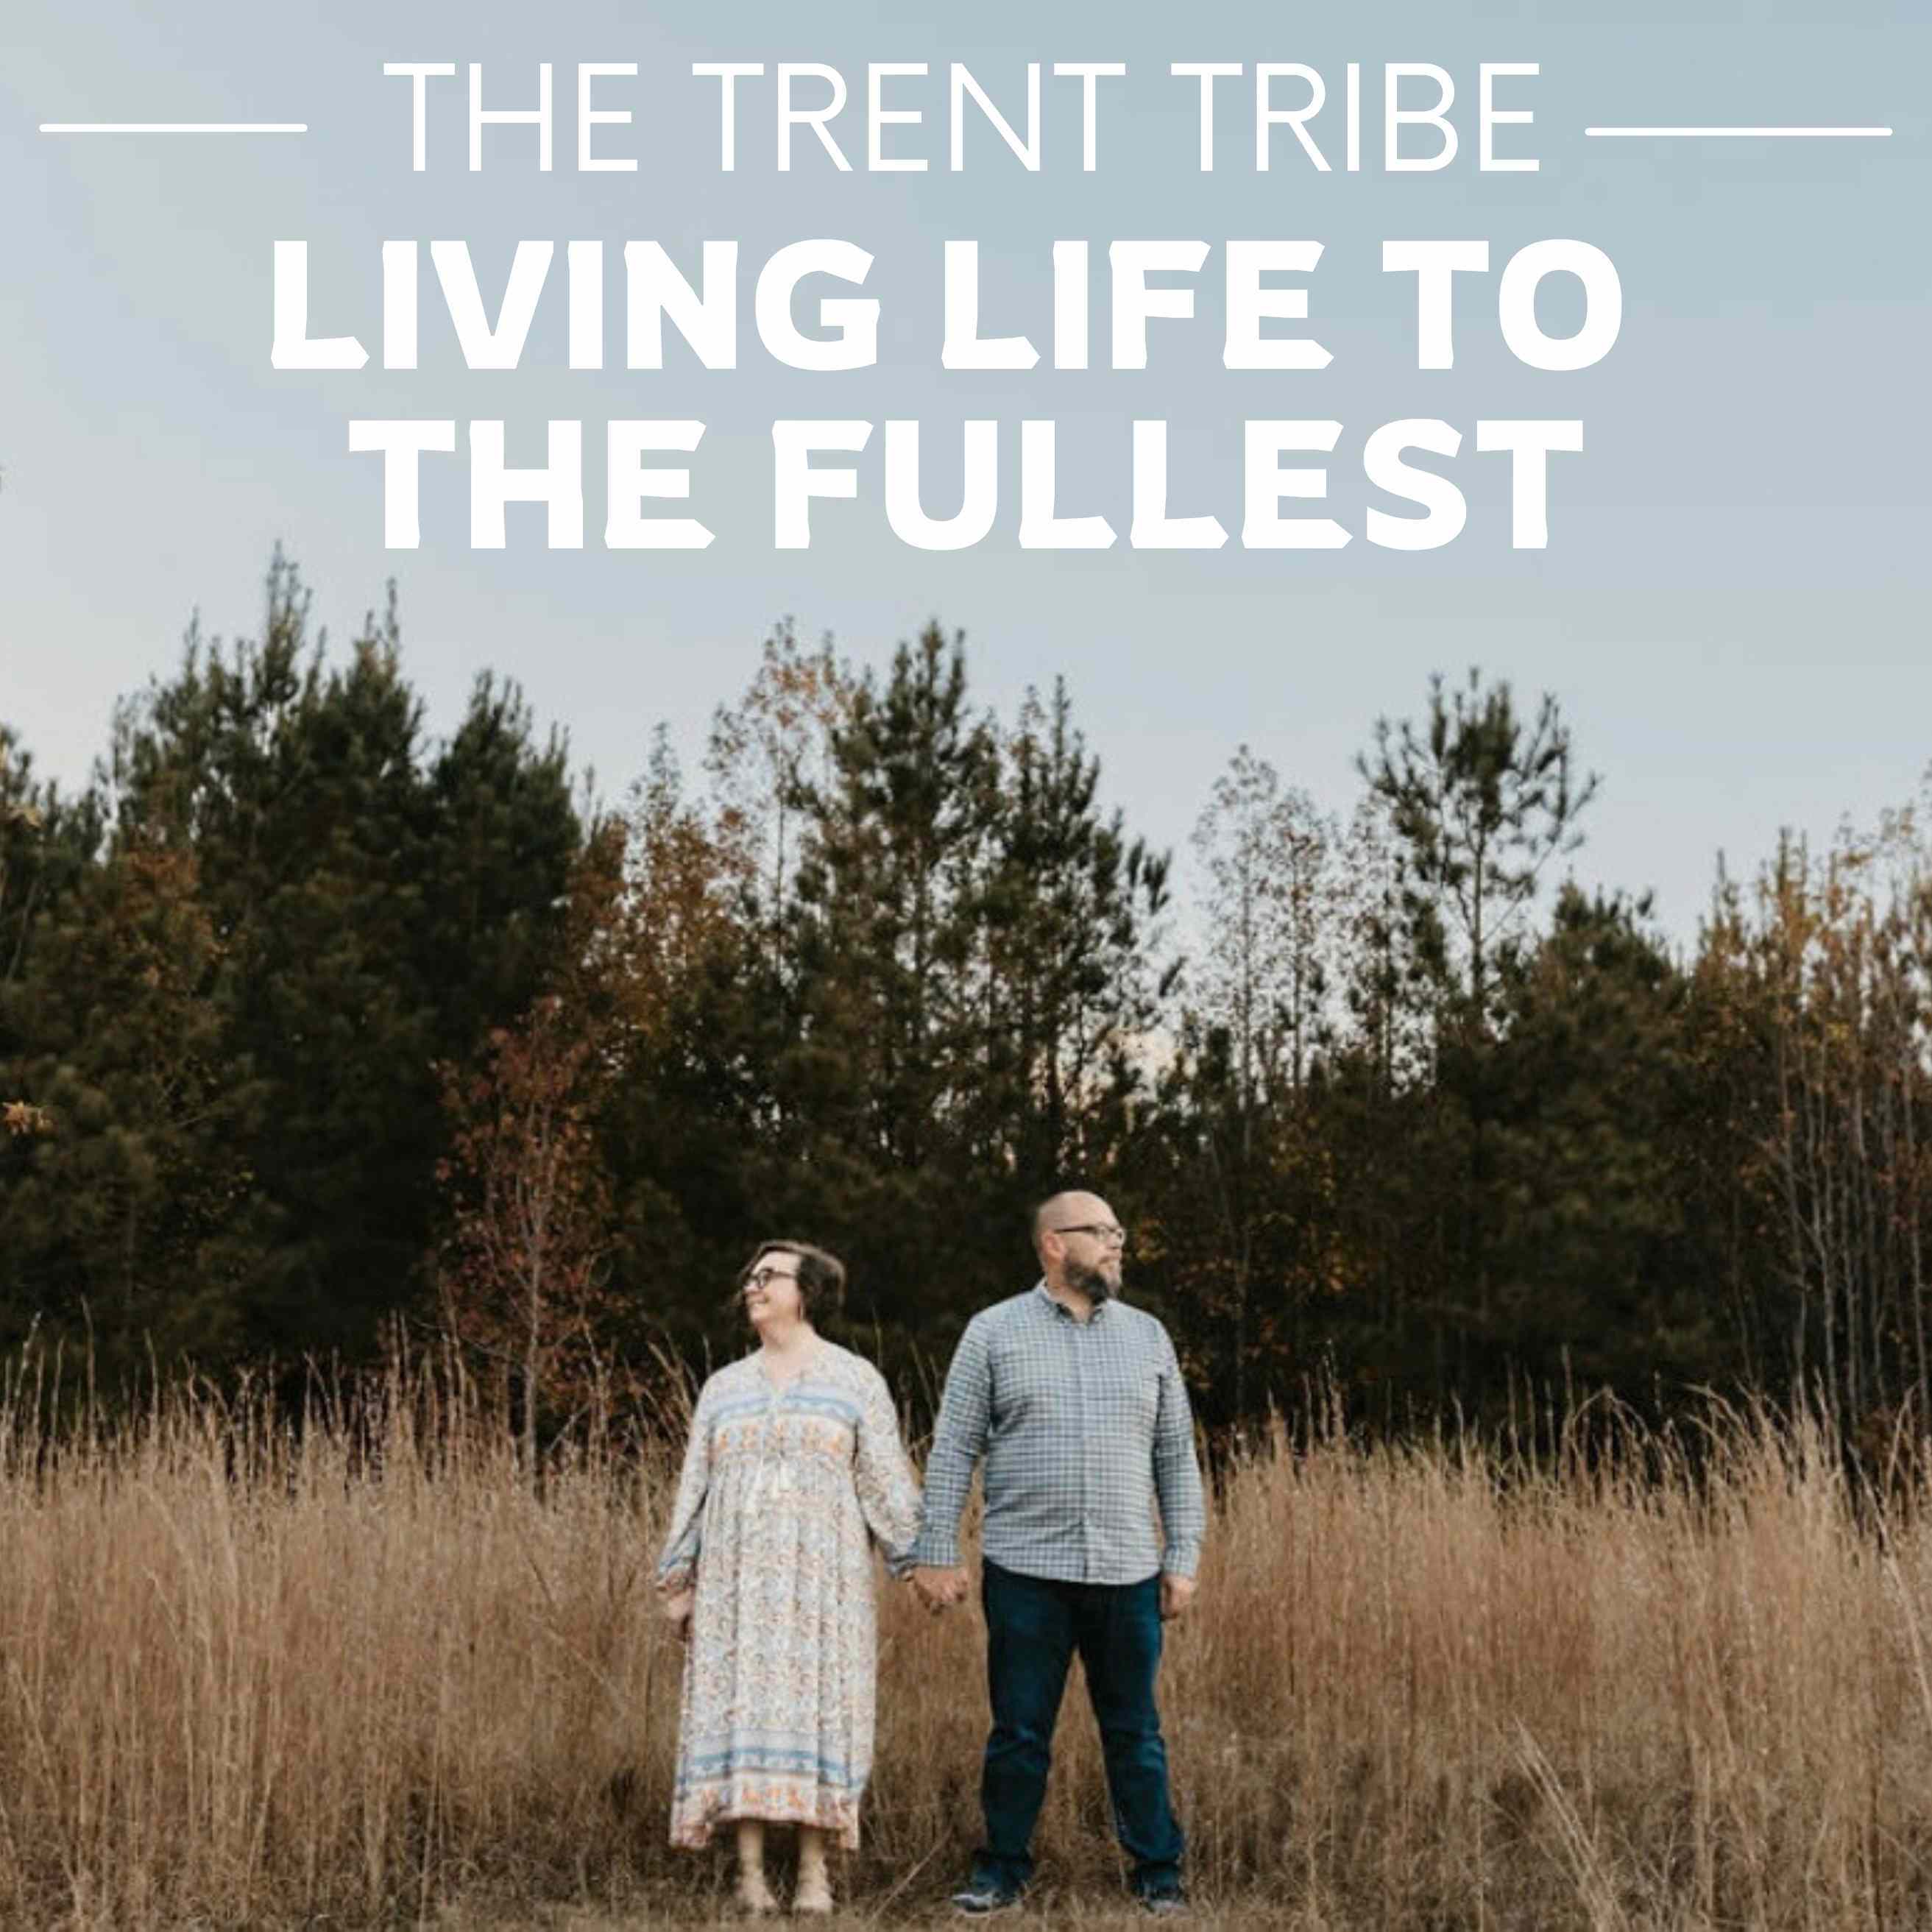 The Trent Tribe